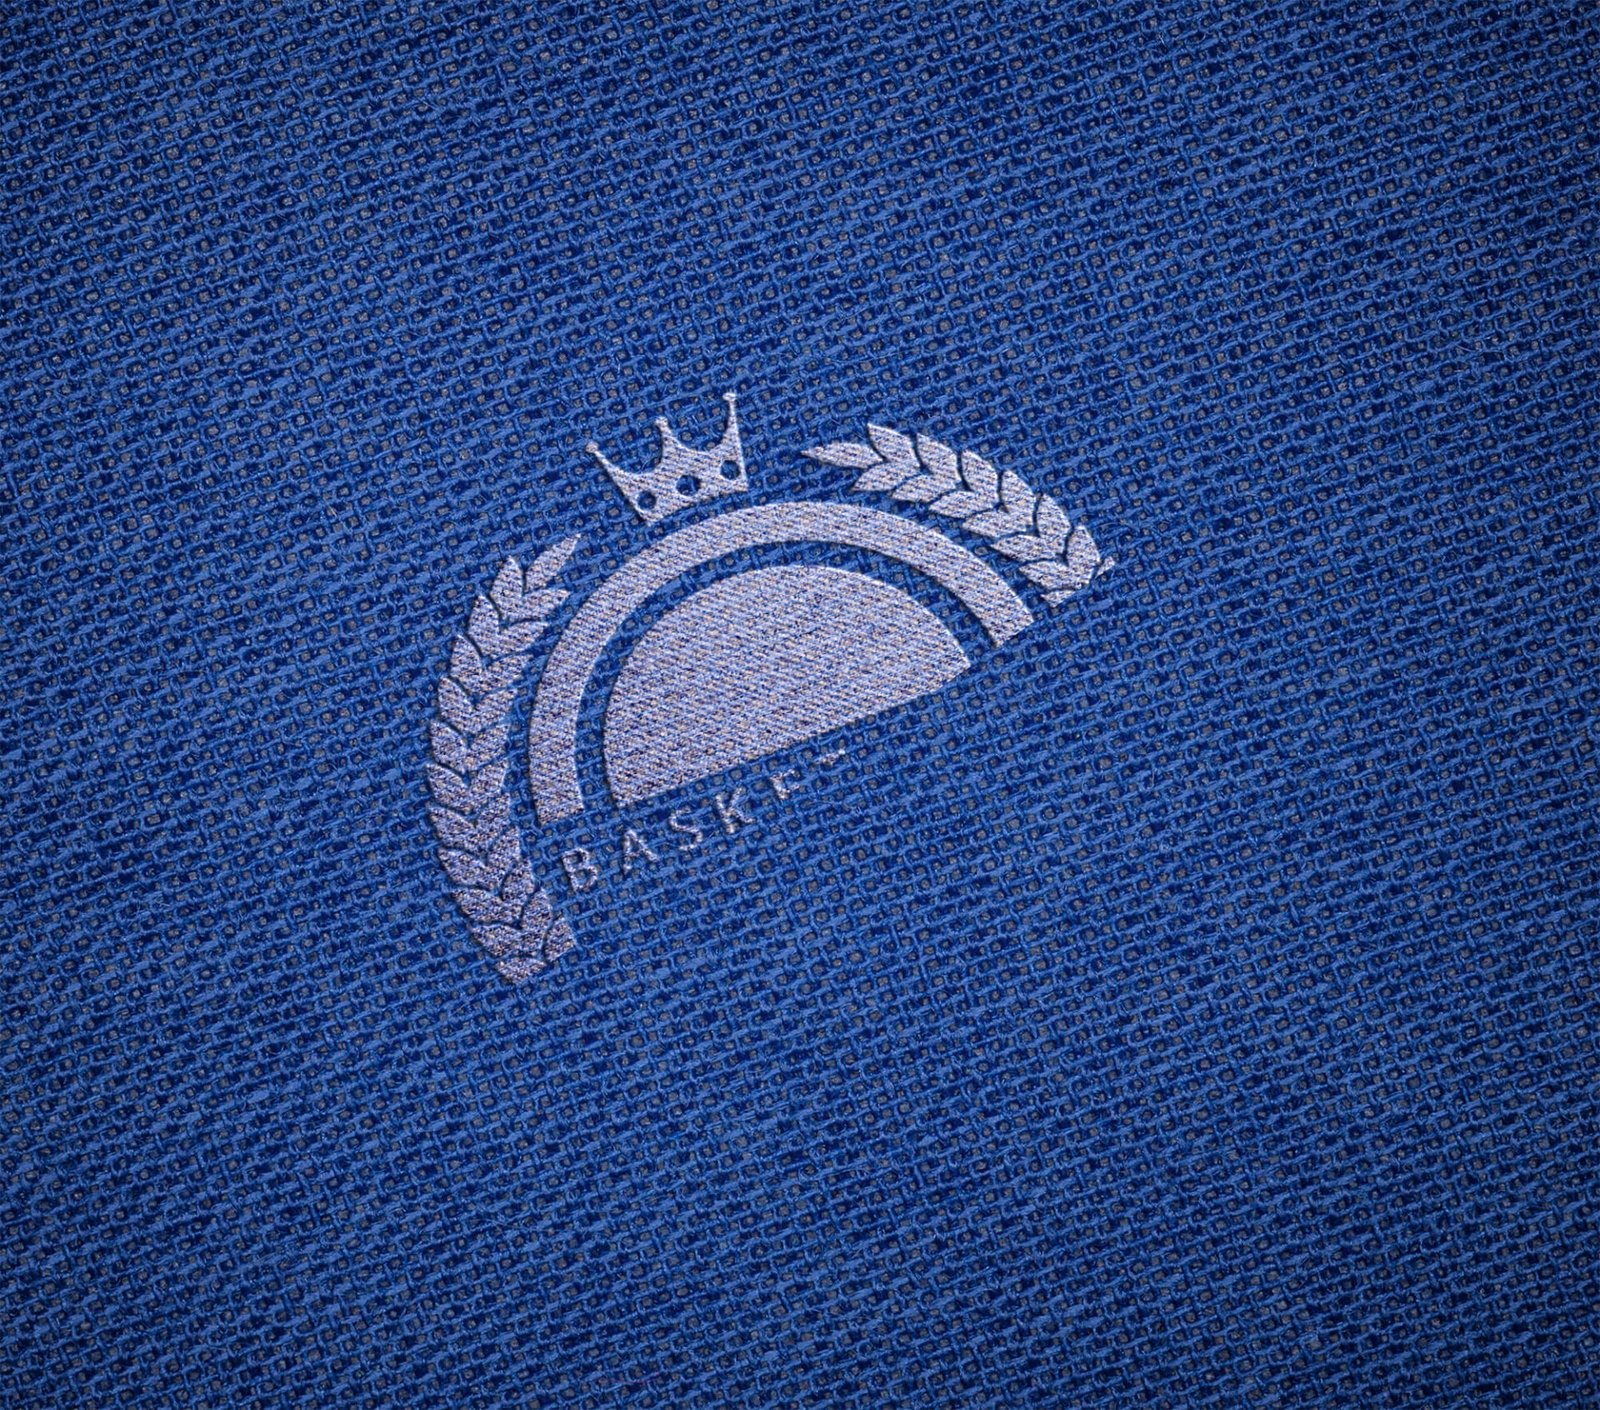 Free Embroidered Logo Mockup Vol 2 PSD Template - Mockupden